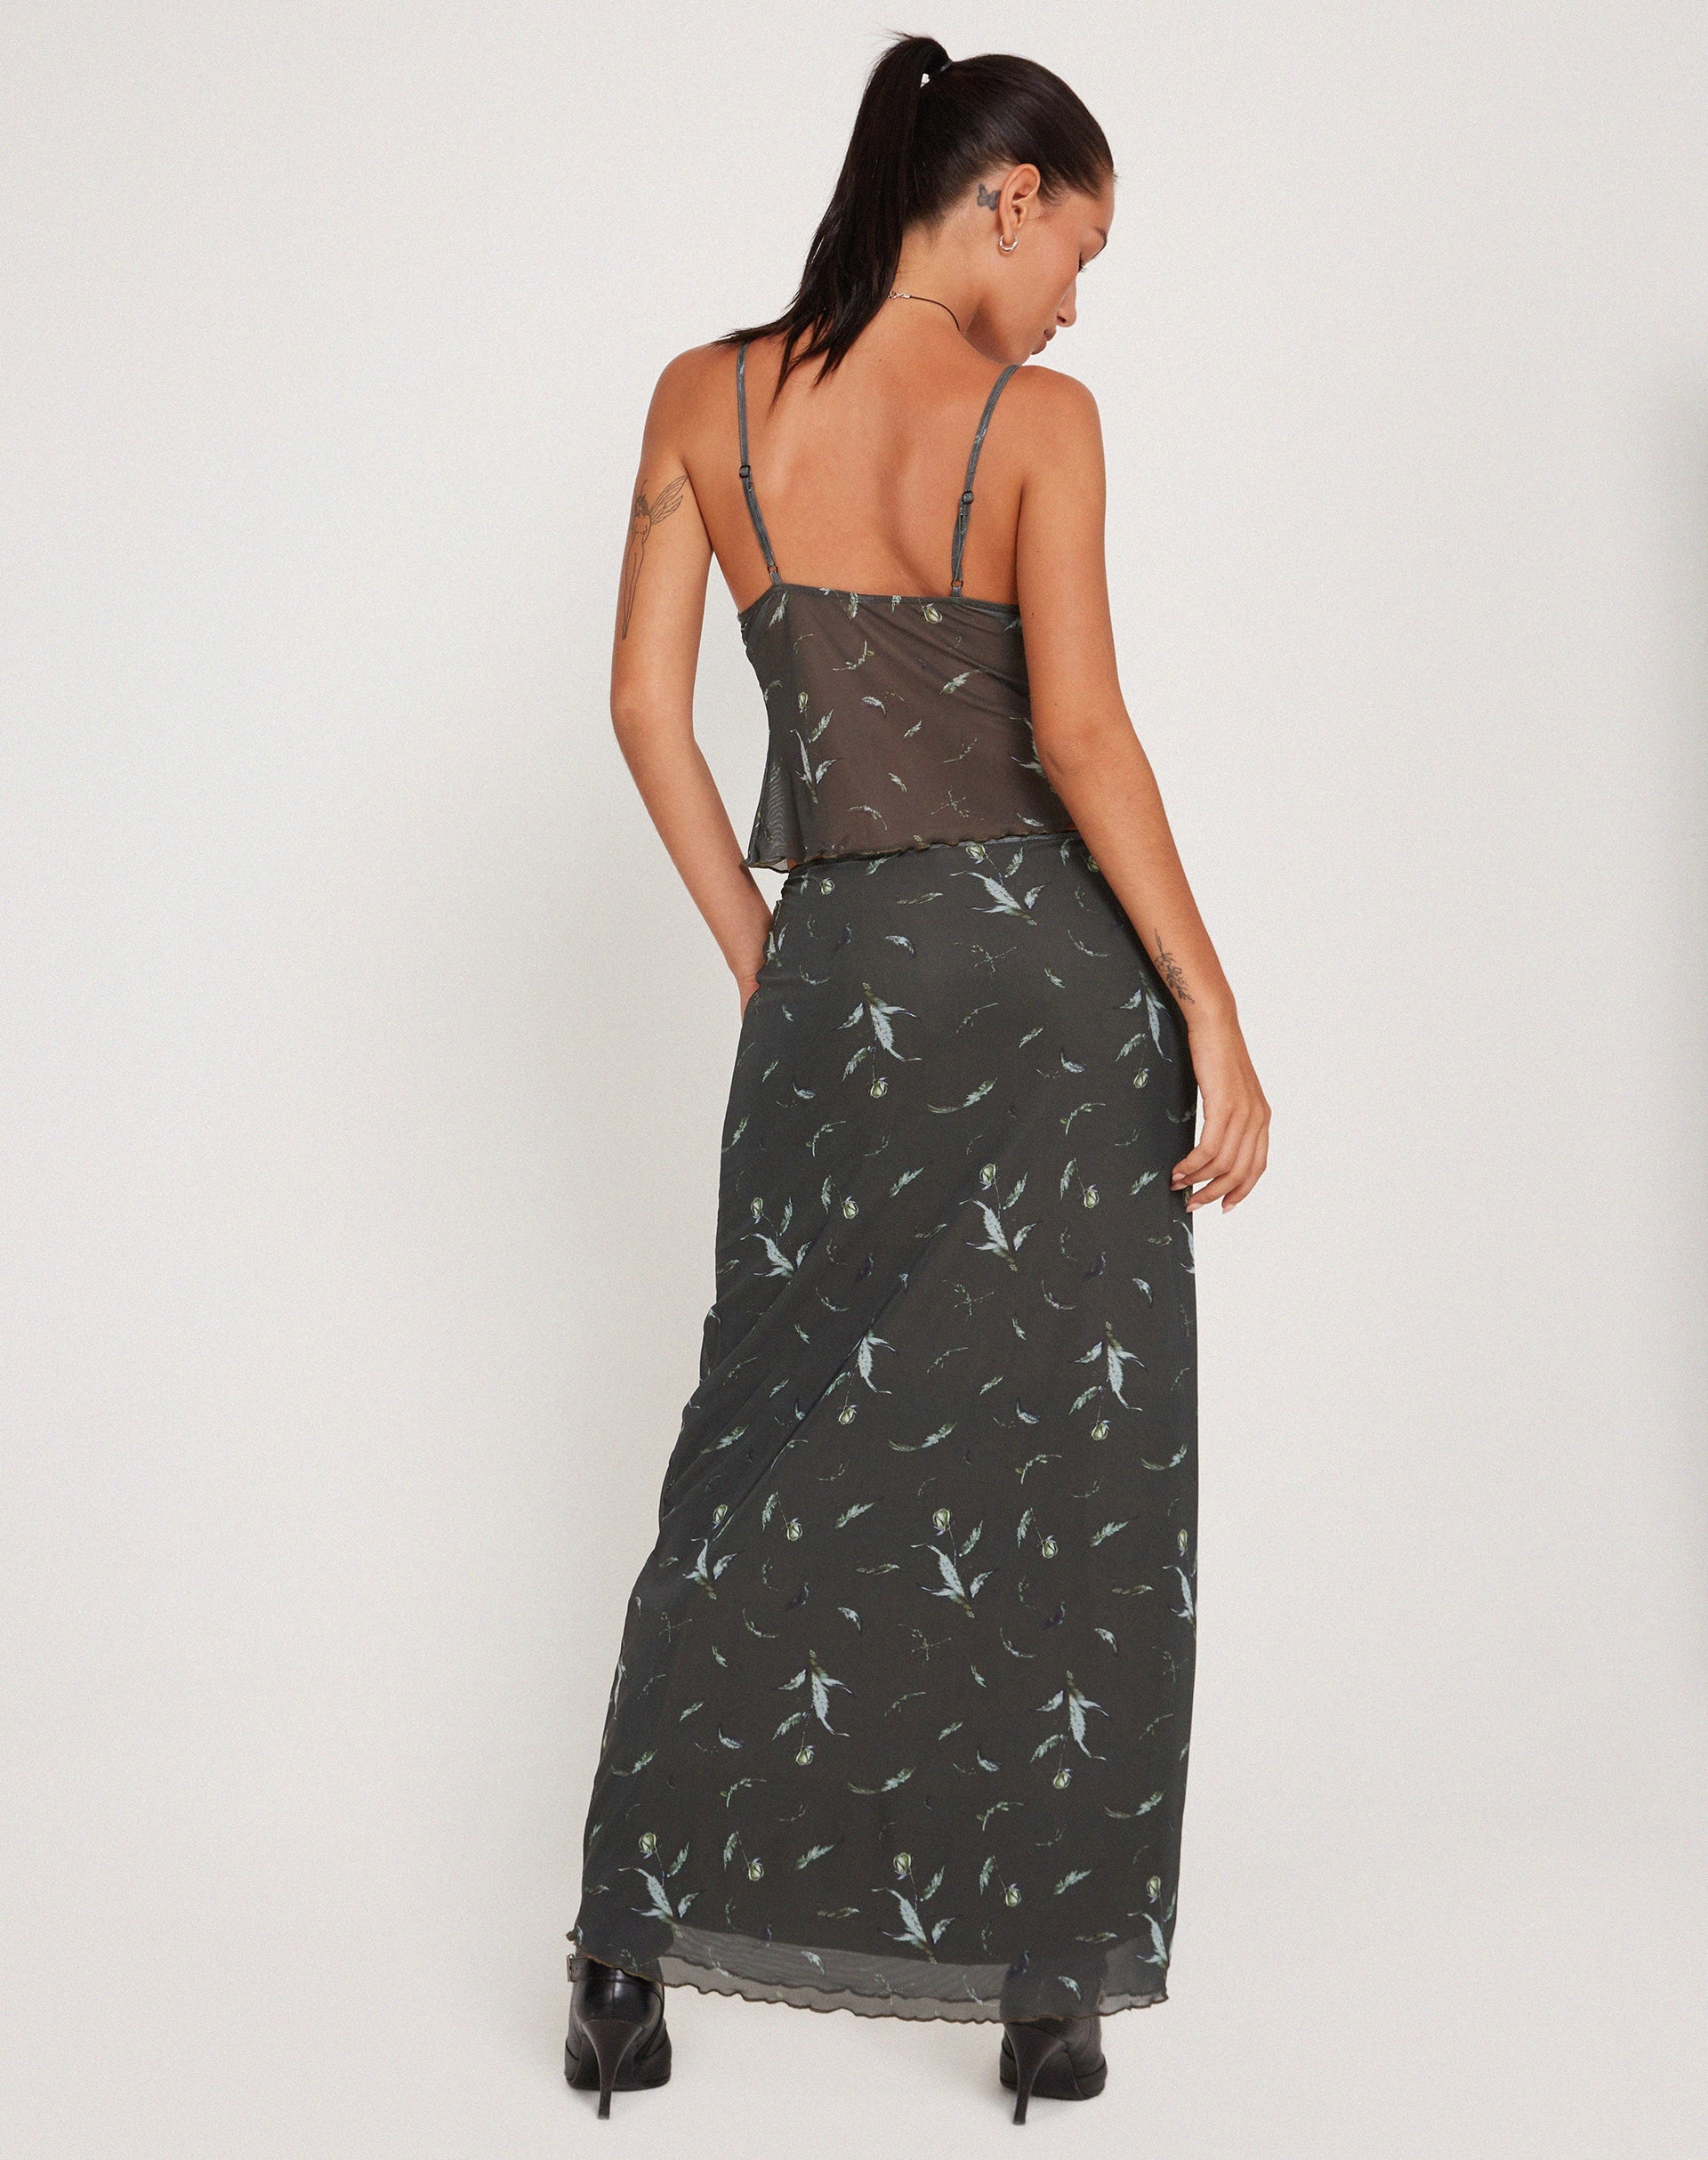 image of Trula Mesh Maxi Skirt in Floral Khaki Silhouette